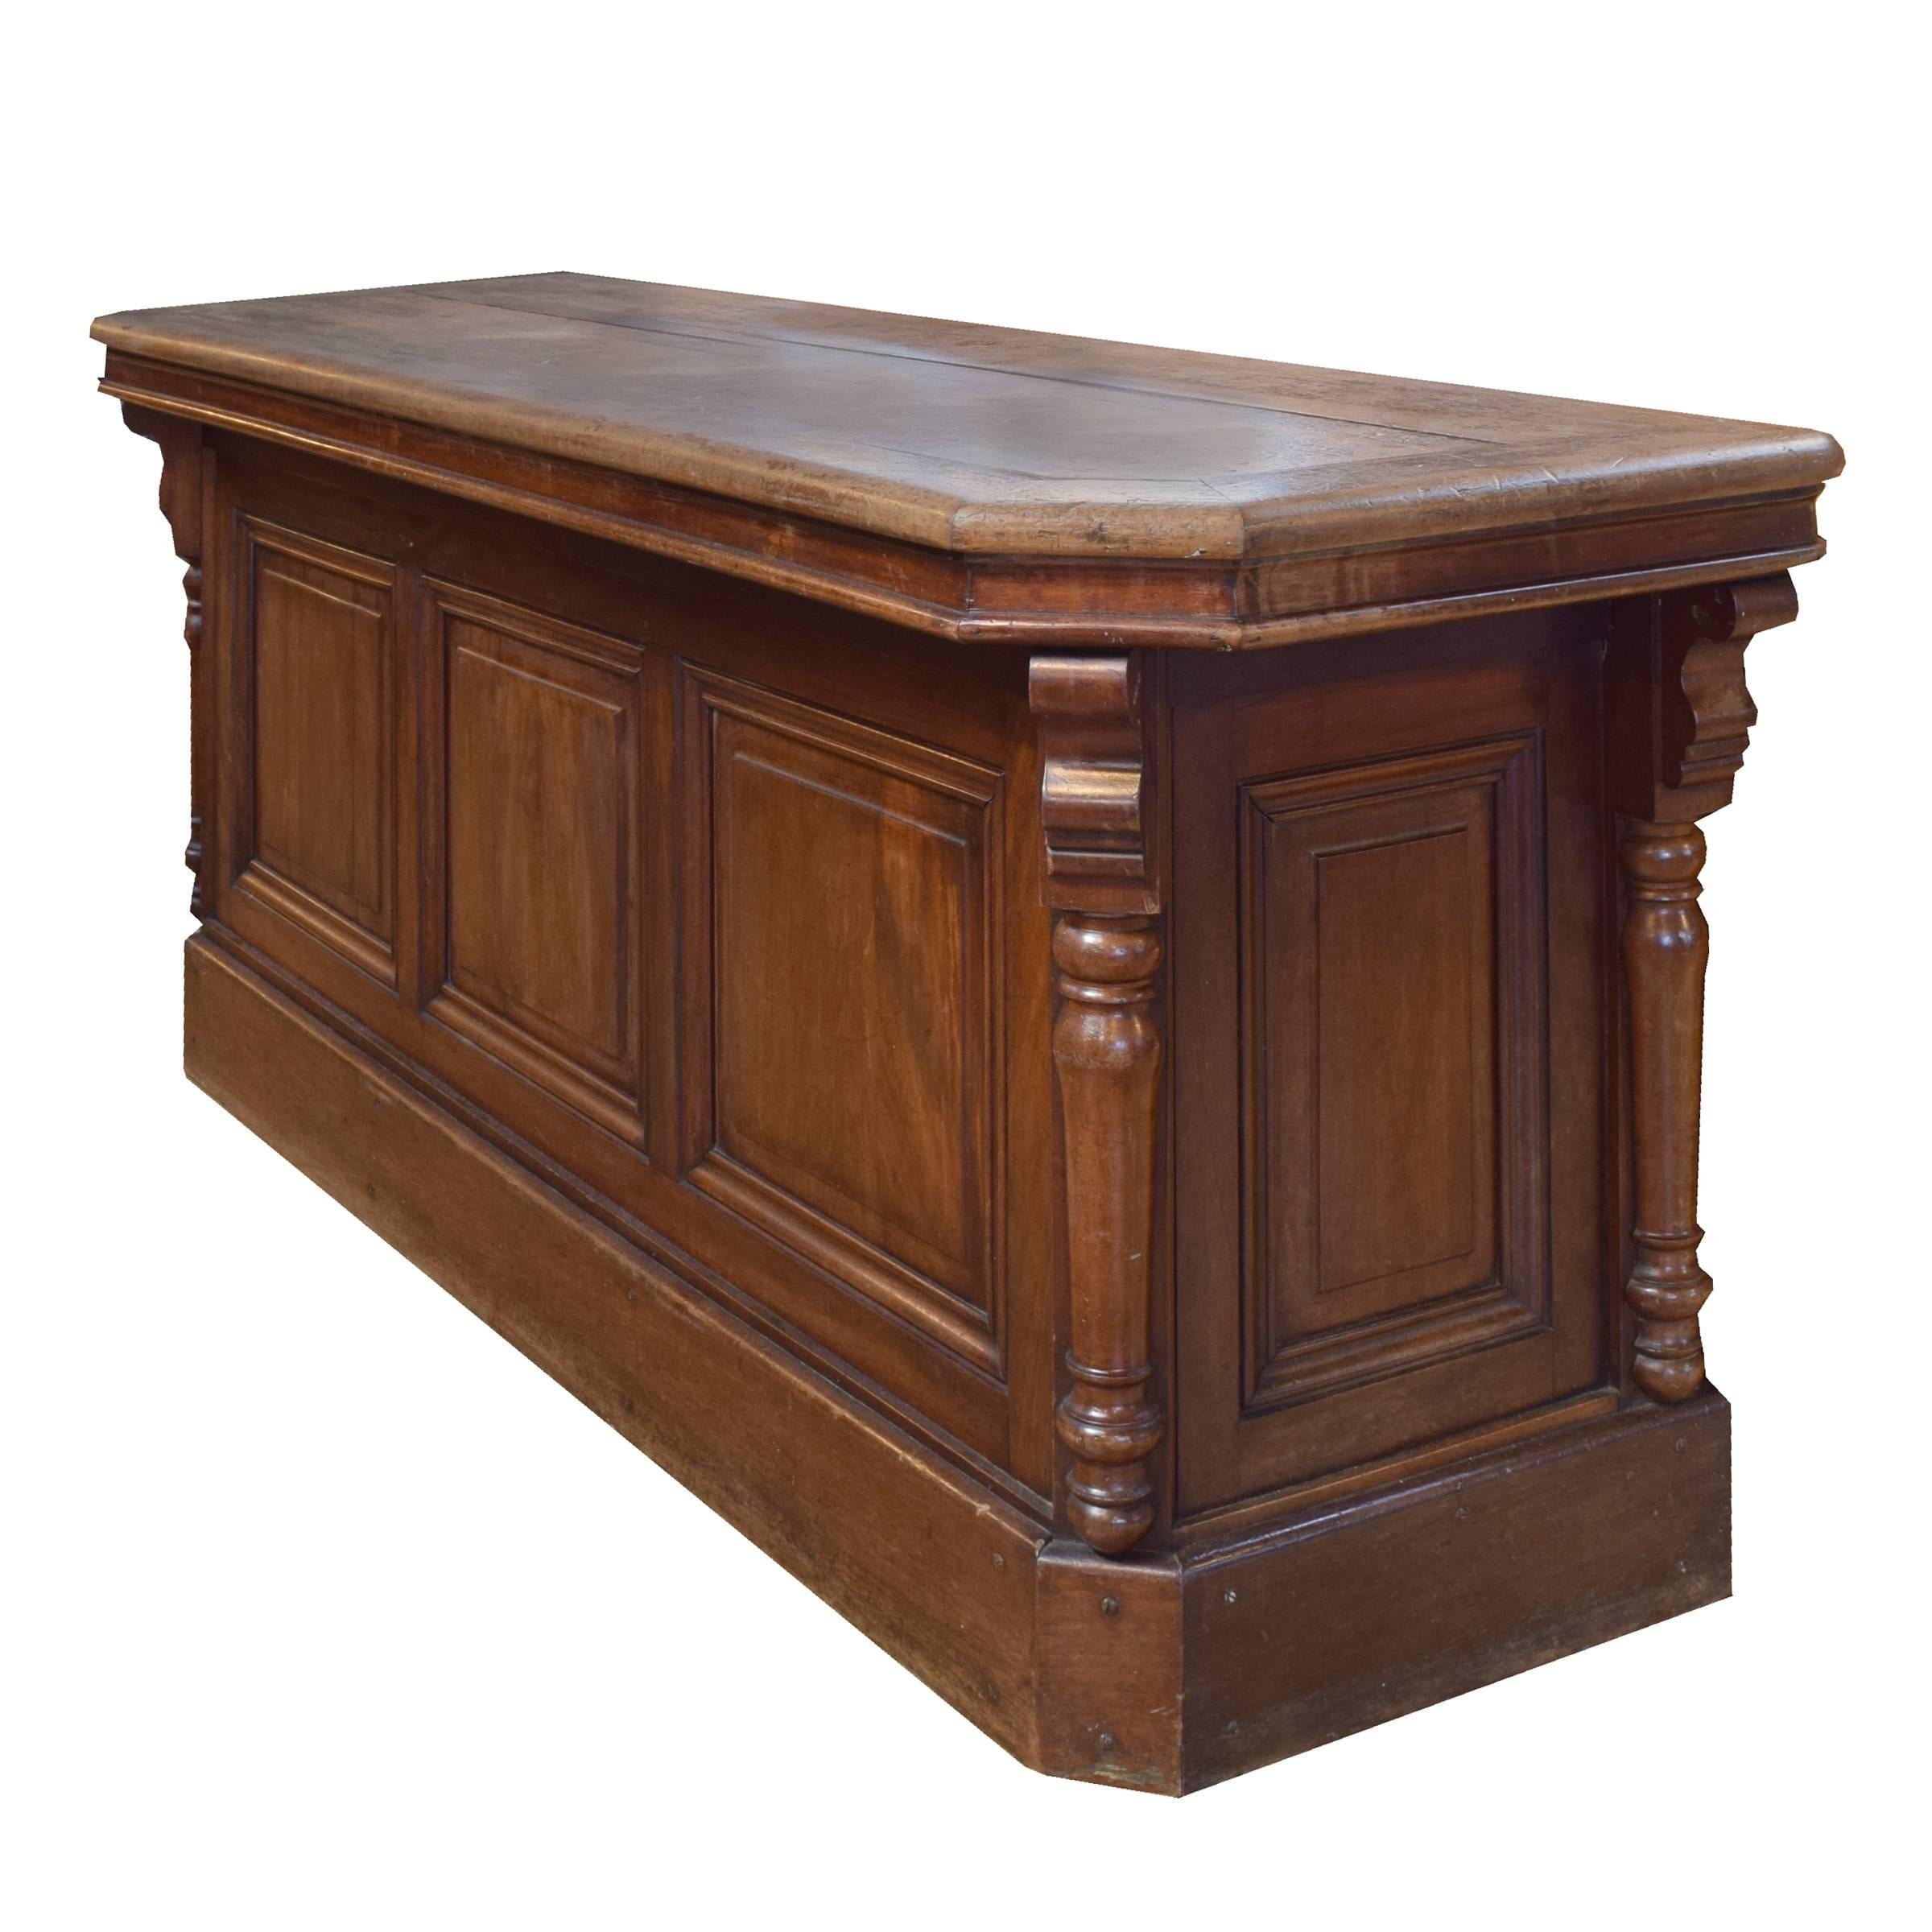 A lovely French walnut store counter with paneled front and sides and an open back, circa 1900.